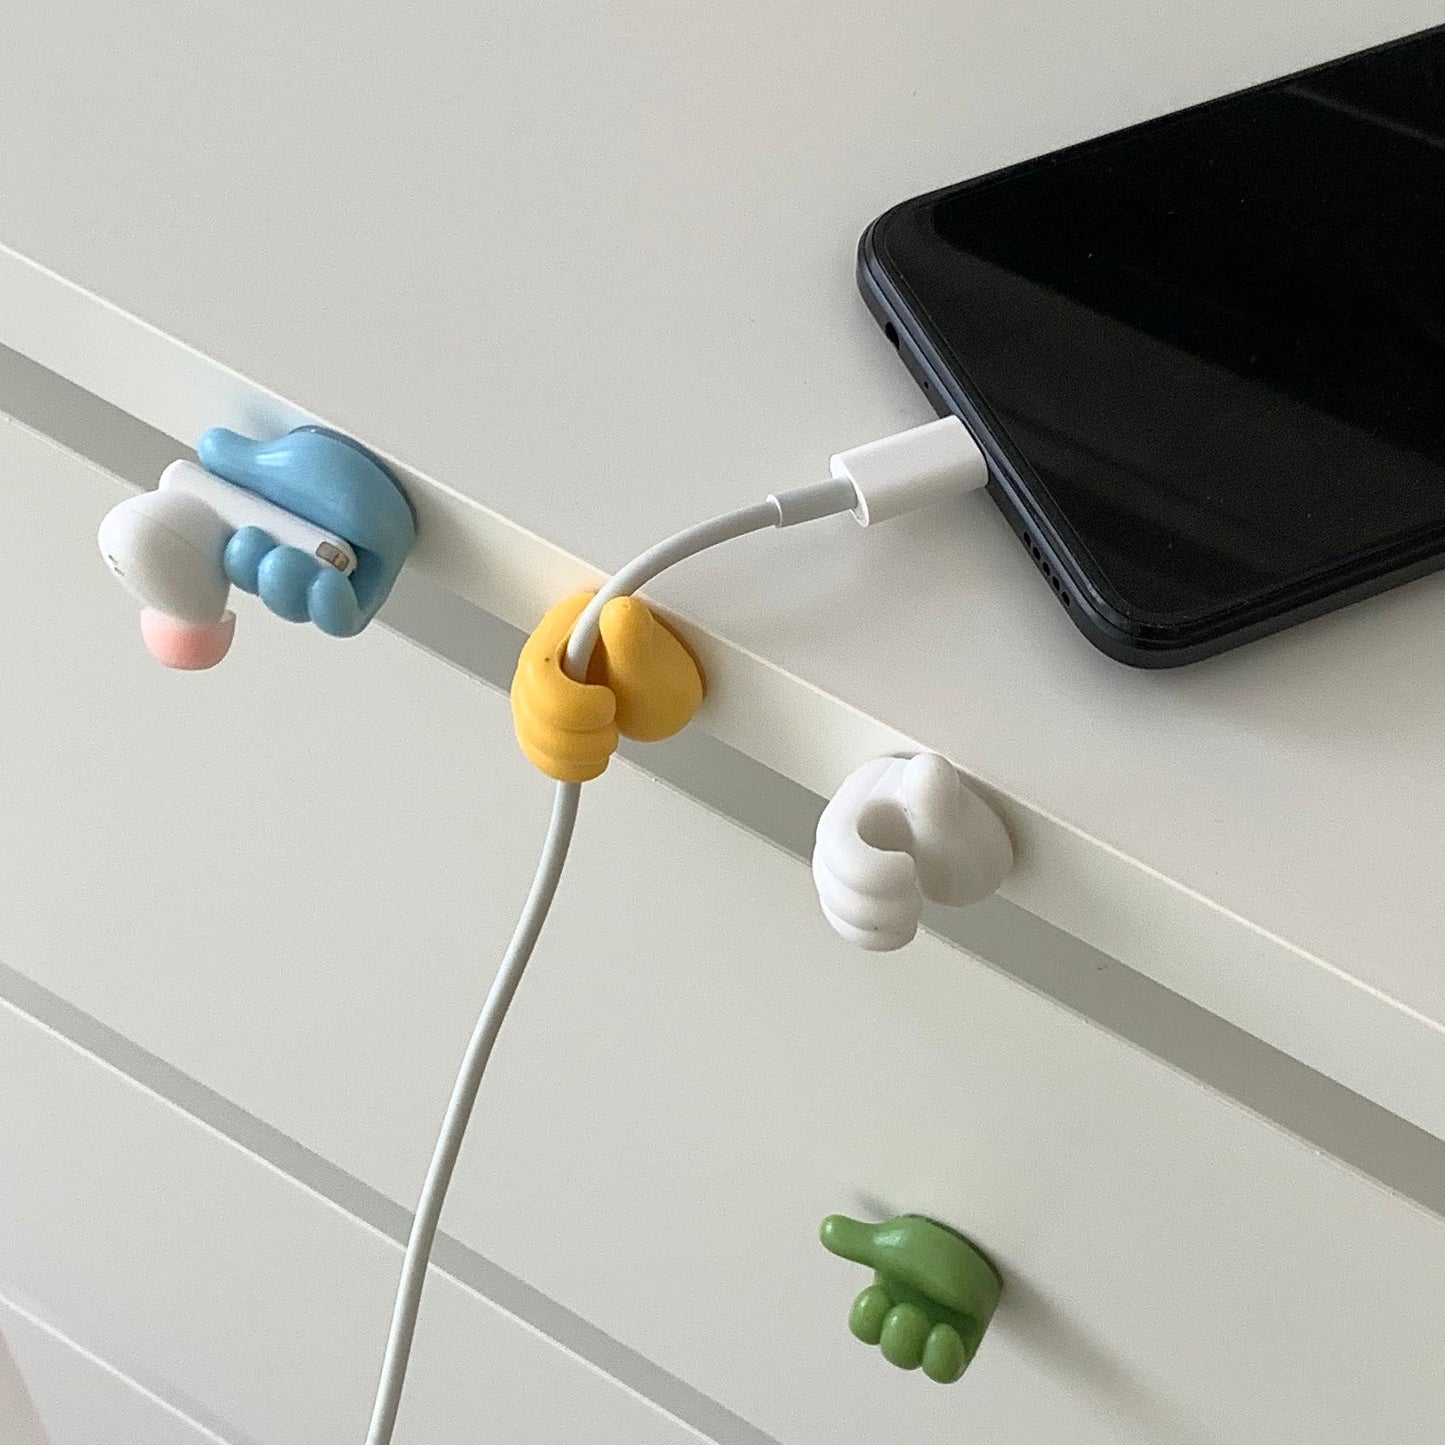 Thumbs Up Colourful Wall Hooks from KROKORI